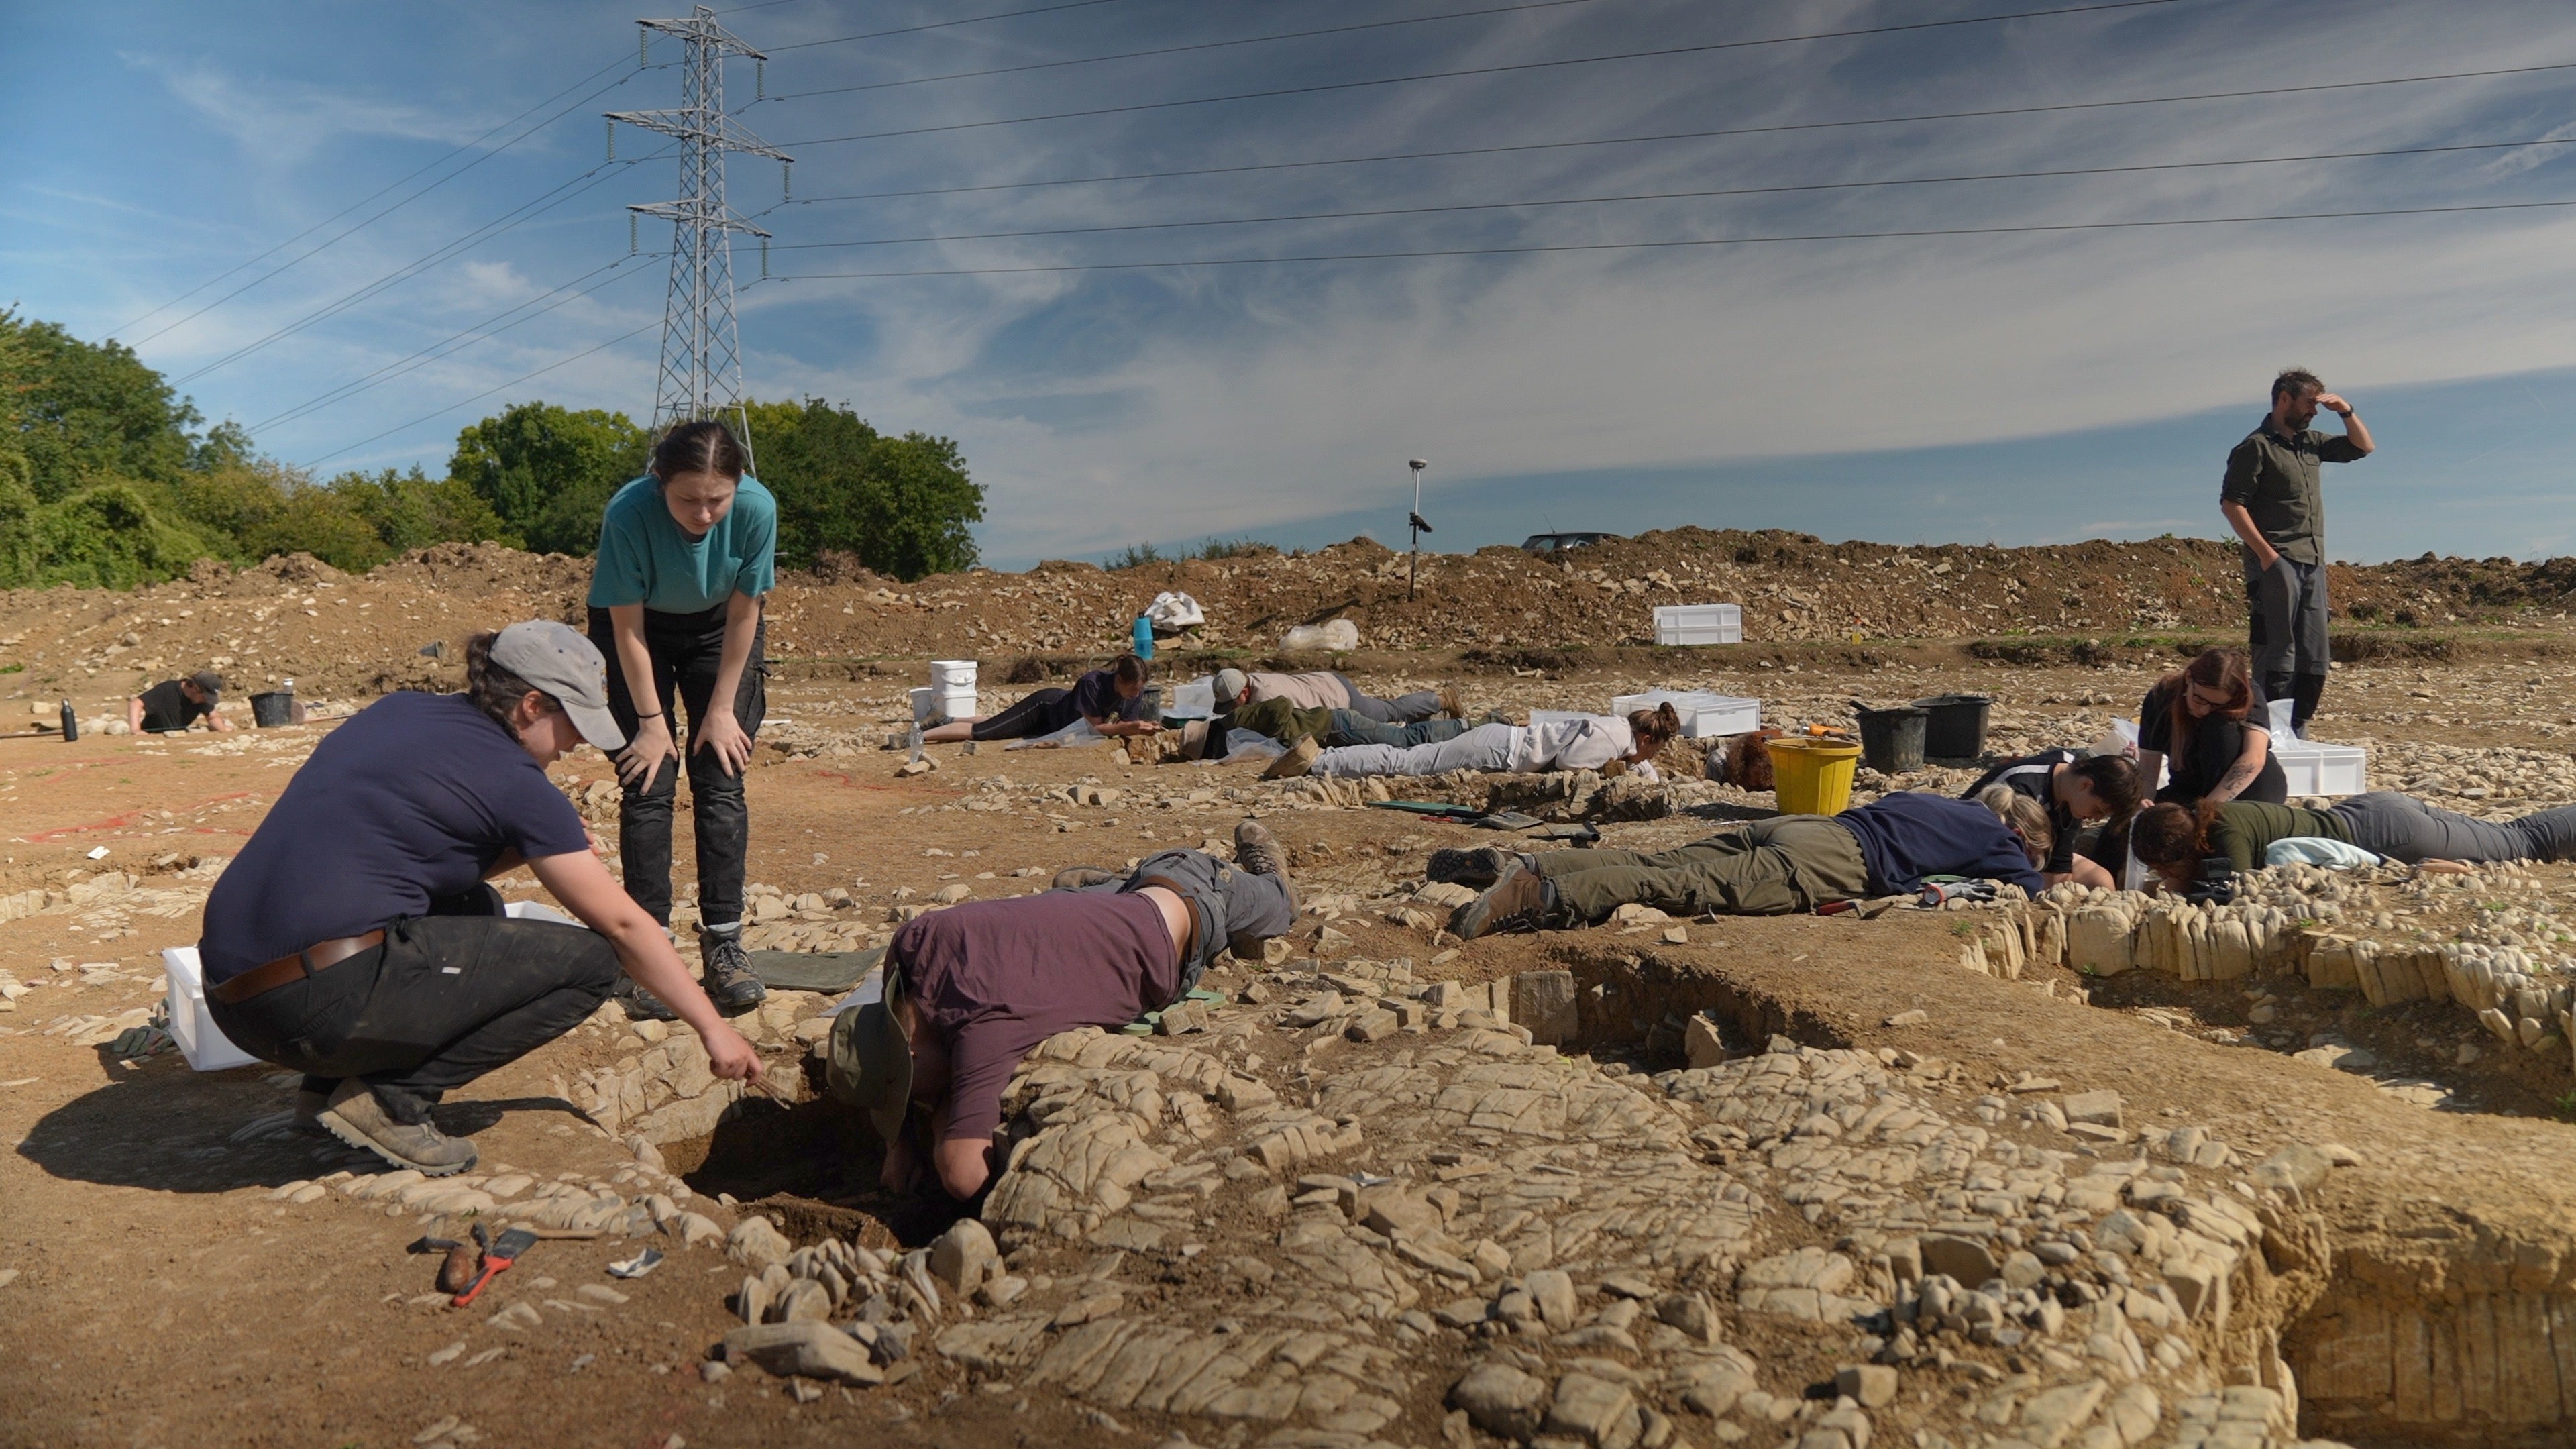 The researchers estimate there are about 70 graves at the site - 18 have been excavated so far